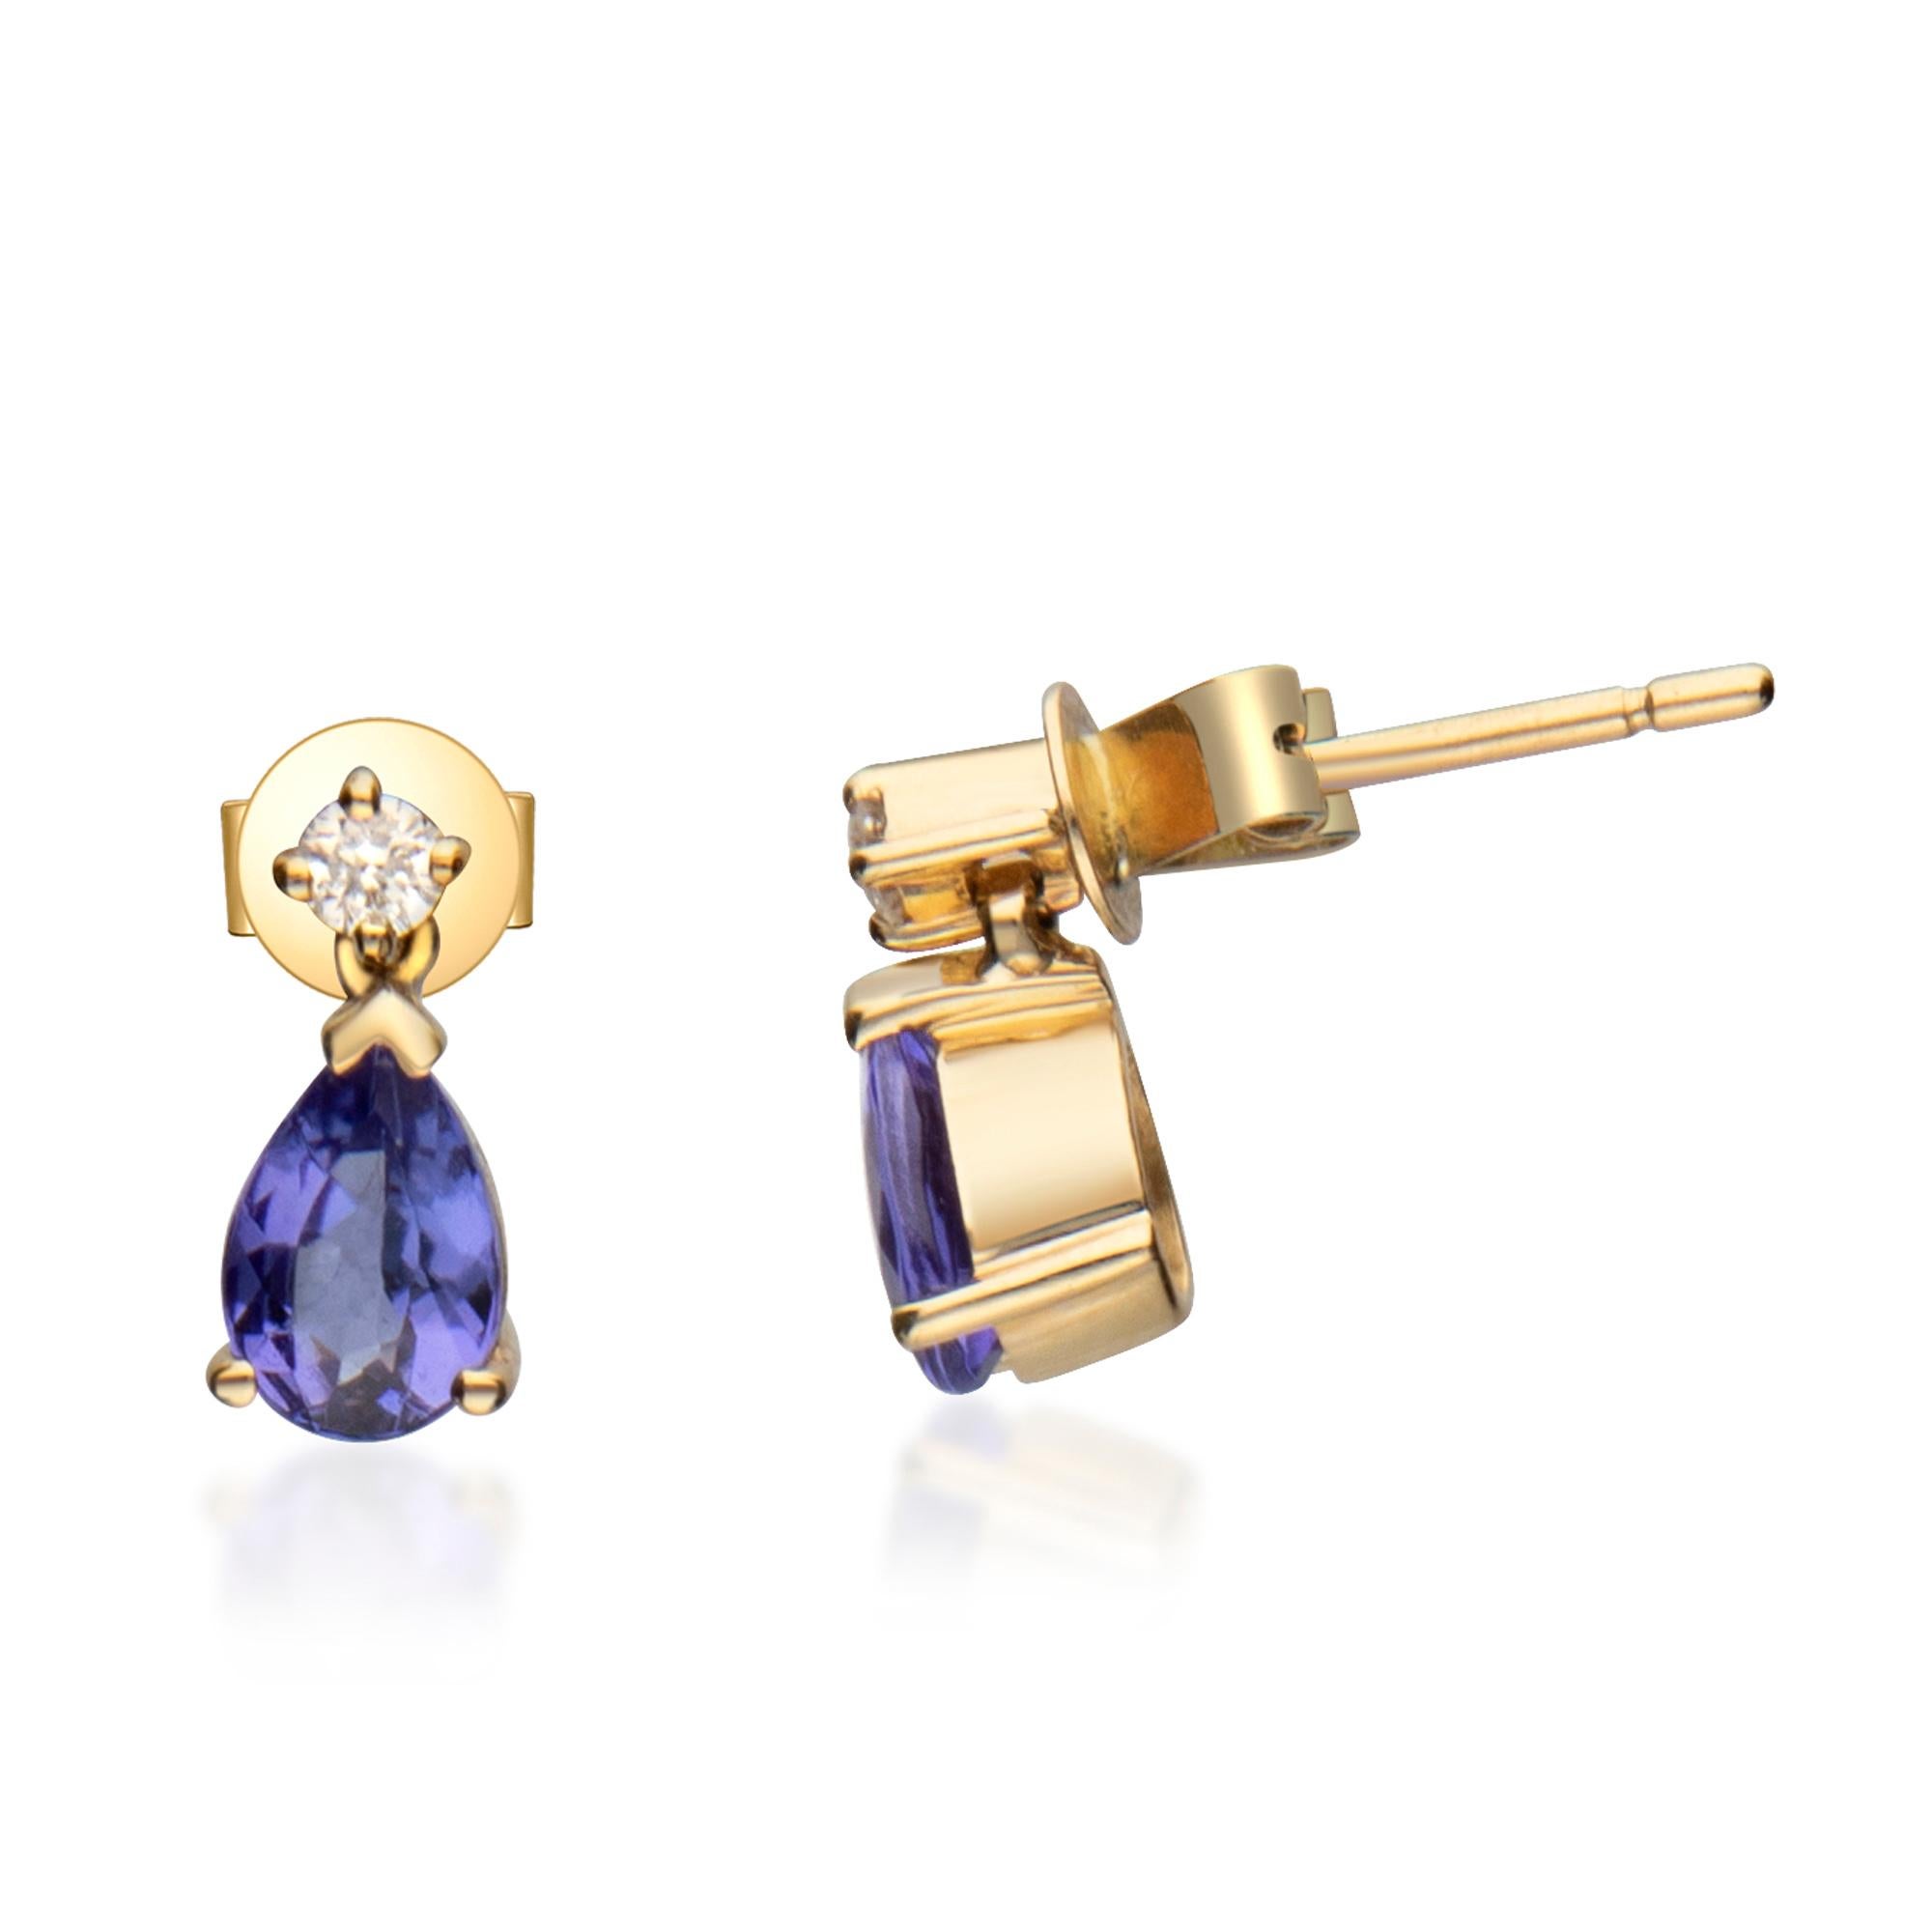 0.83 Carat Pear Cut Tanzanite Diamond Accents 14k Yellow Gold Earring In New Condition For Sale In New York, NY